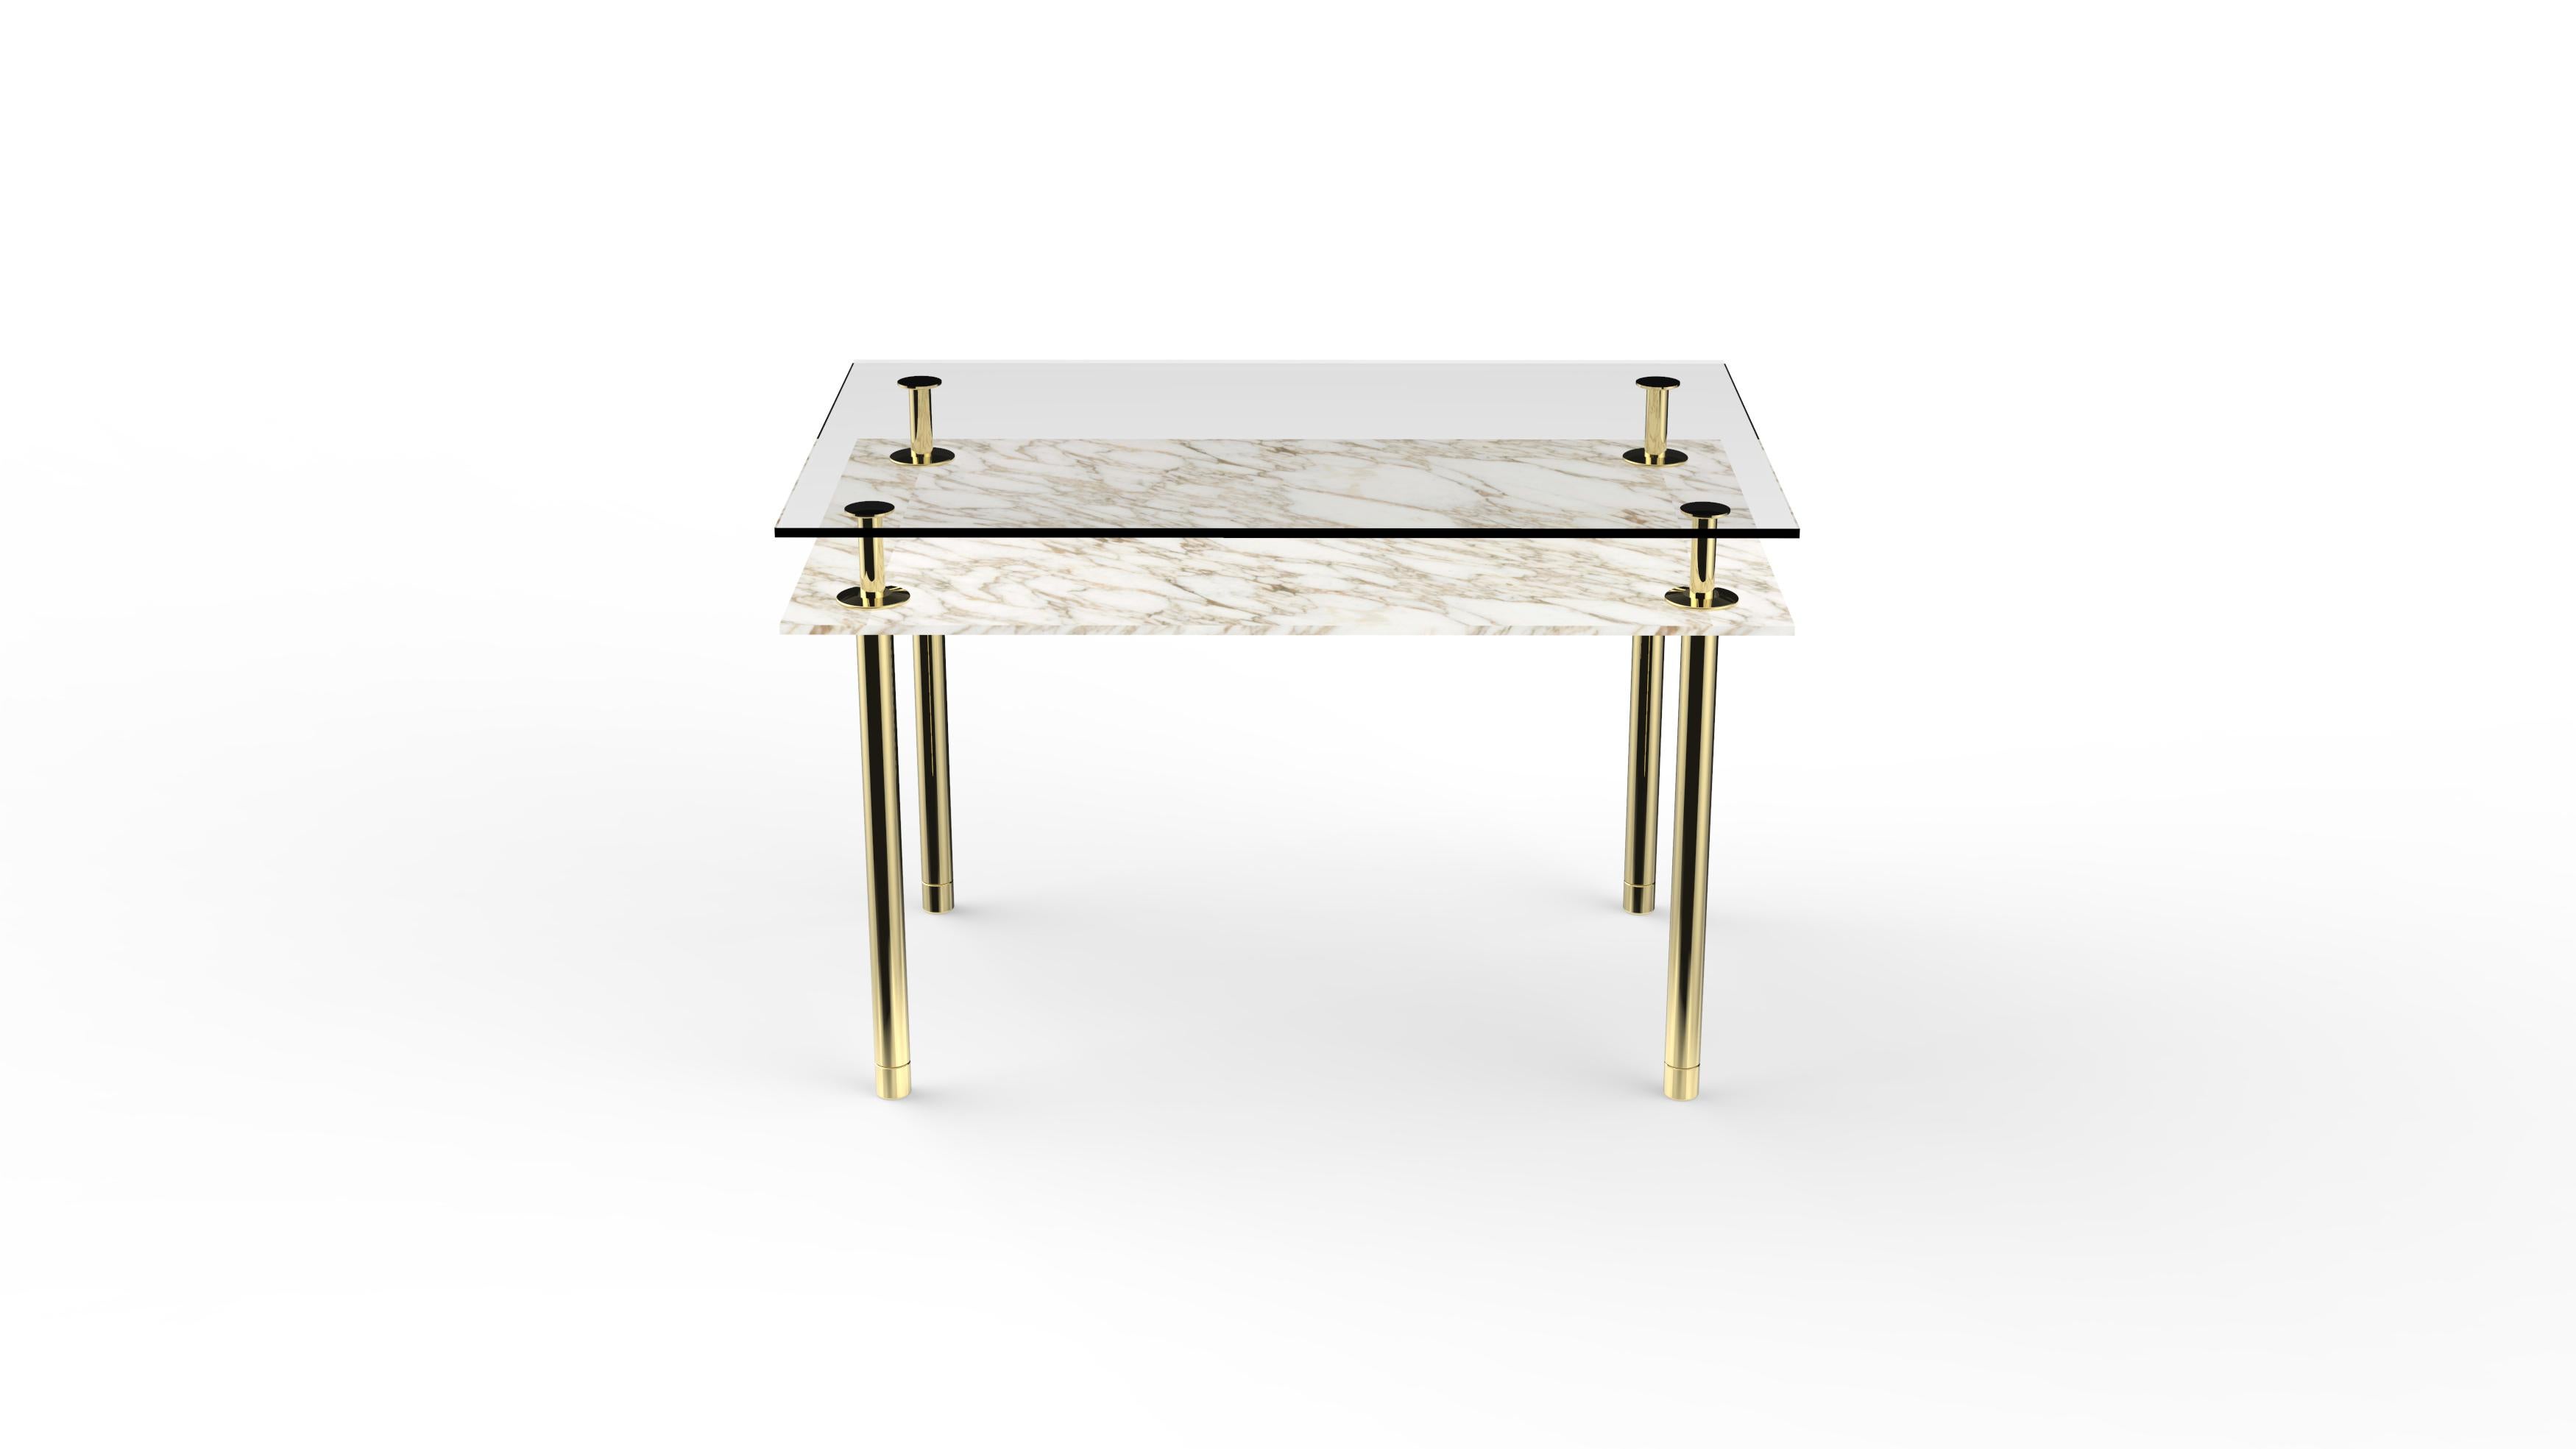 Rectangular table in crystal and brass. The designer imagines a turning point in the use of such a precious finishes such as polished brass: from the idea of almost a unique object in its perfect craftsmanship, to the system to be built starting